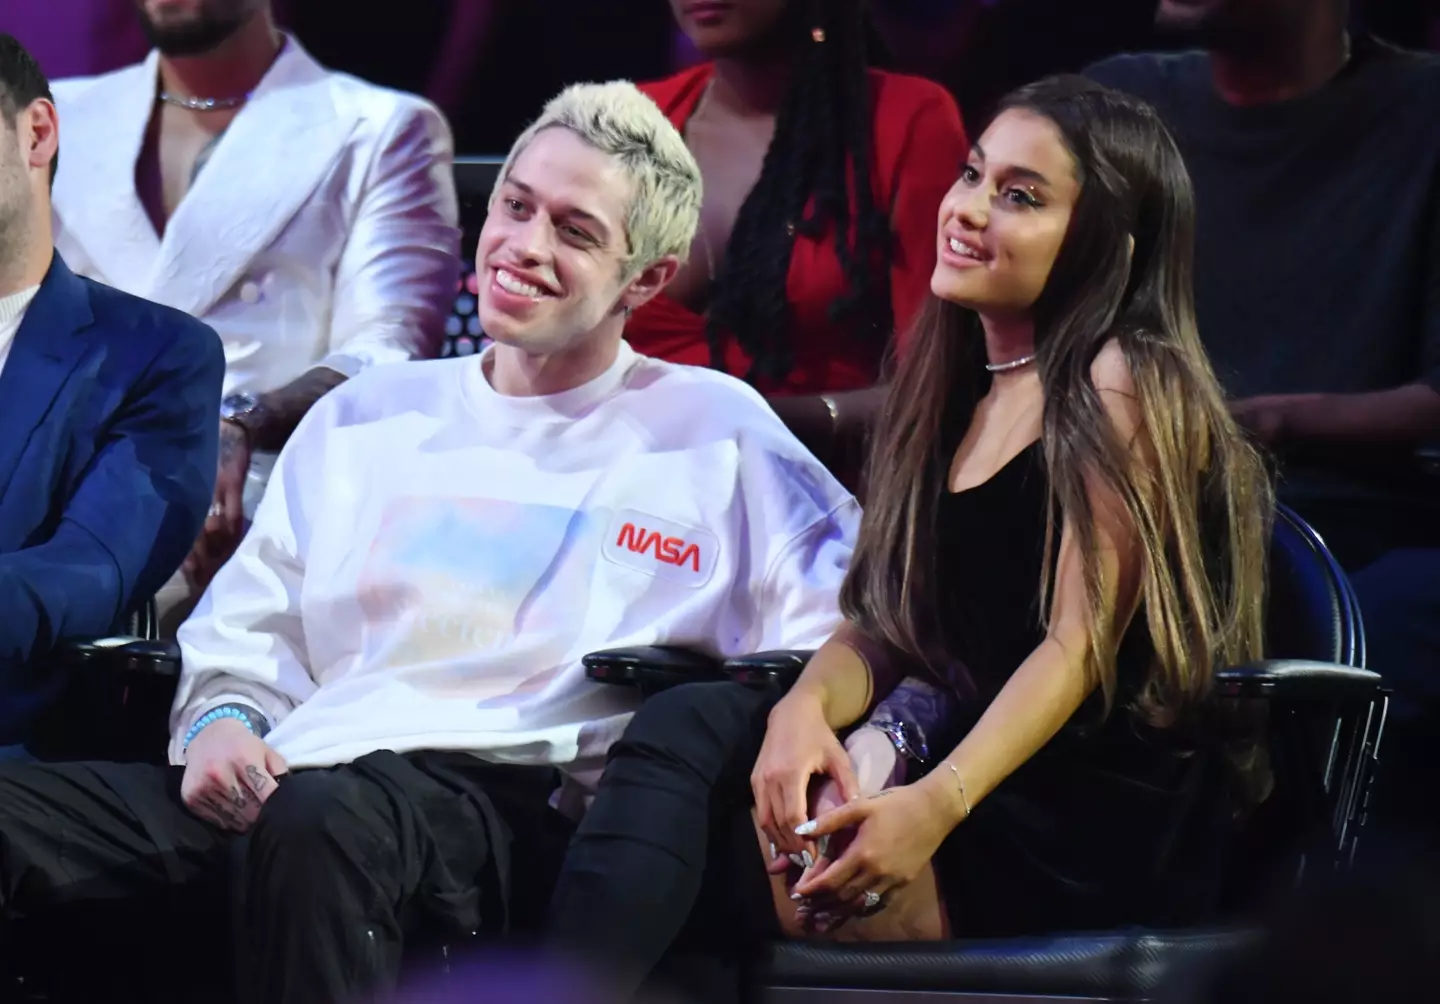 Pete Davidson showed up to the funeral with Ariana Grande.